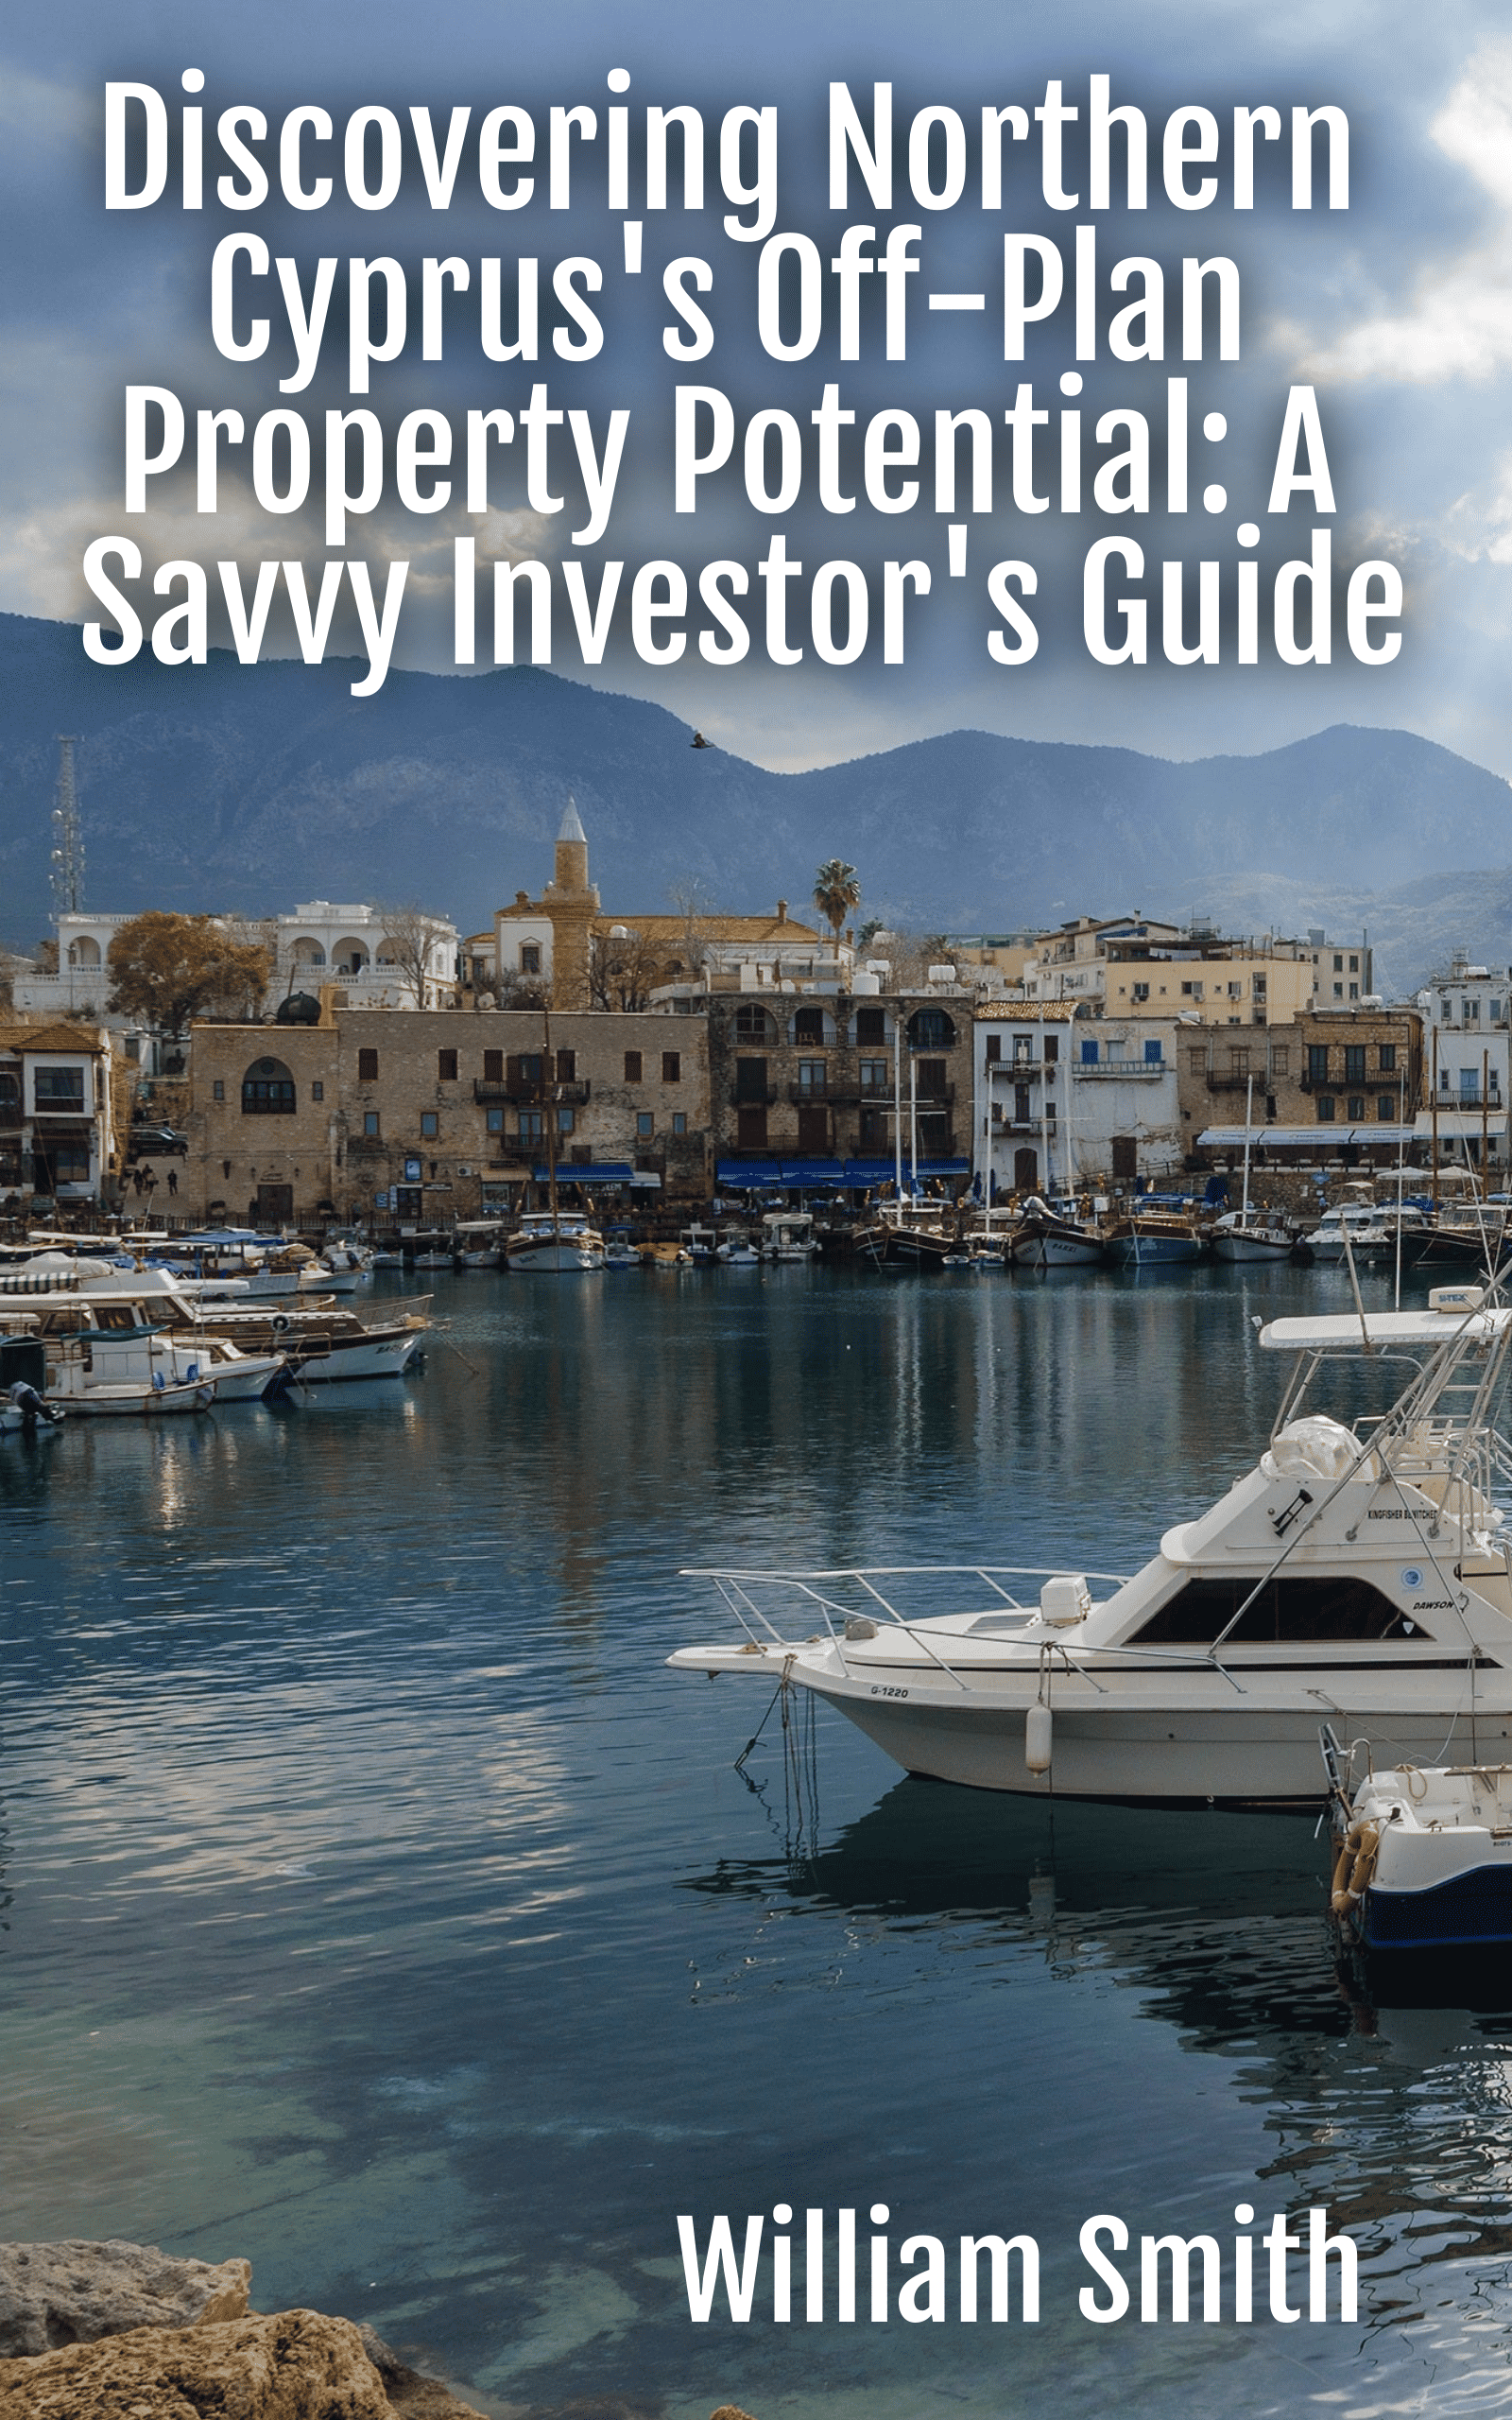 Off-Plan Property Investment in Northern Cyprus: A Hidden Gem for Savvy Investors